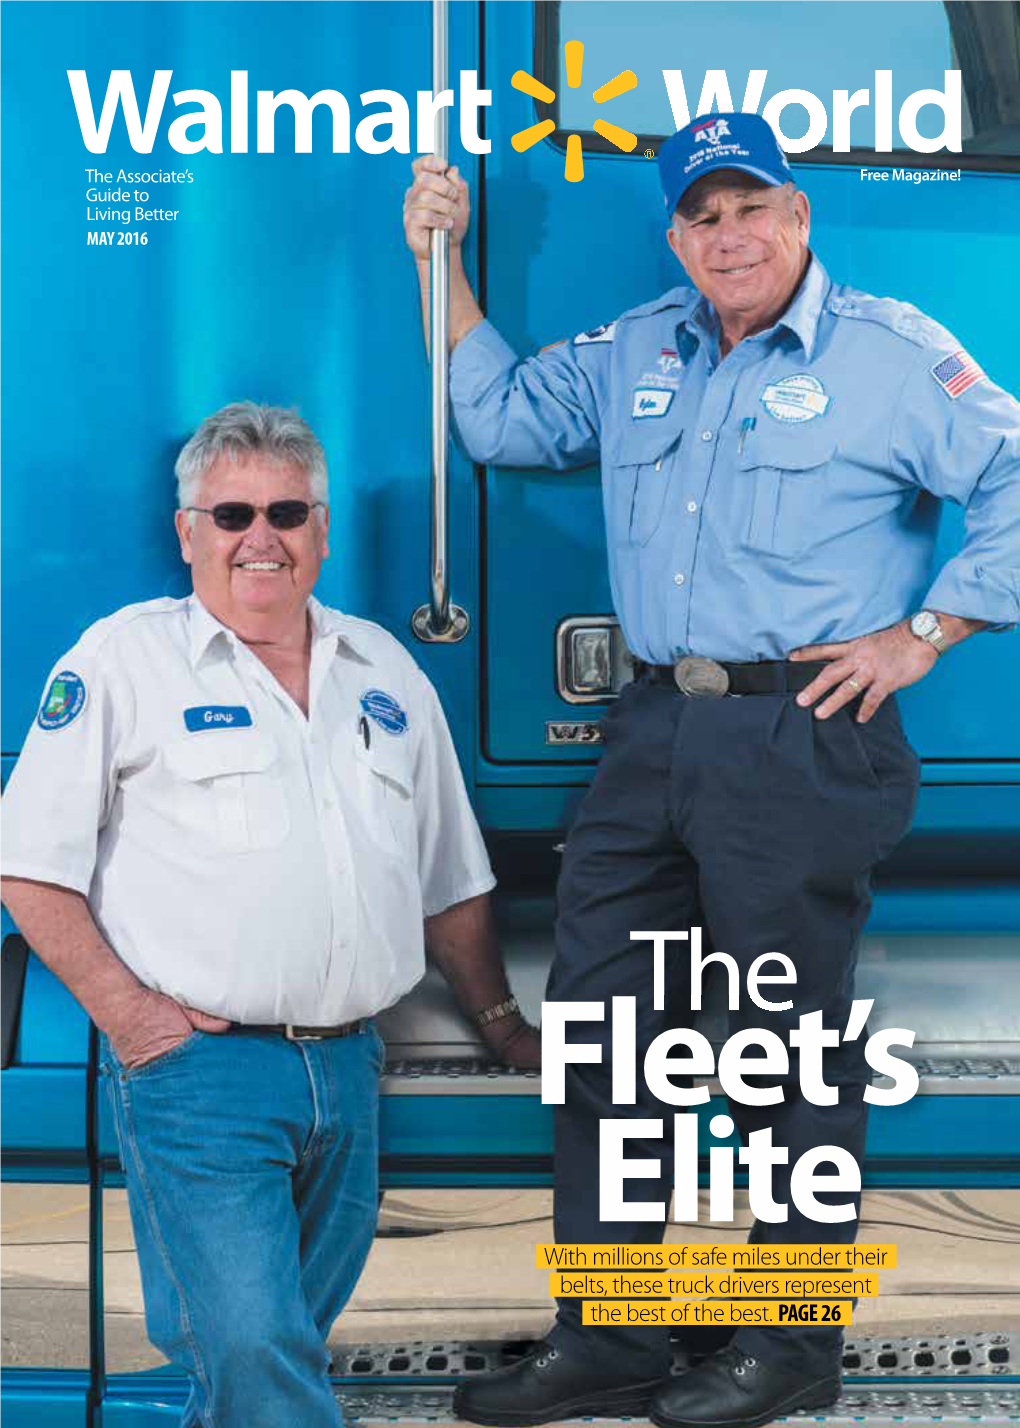 With Millions of Safe Miles Under Their Belts, These Truck Drivers Represent the Best of the Best